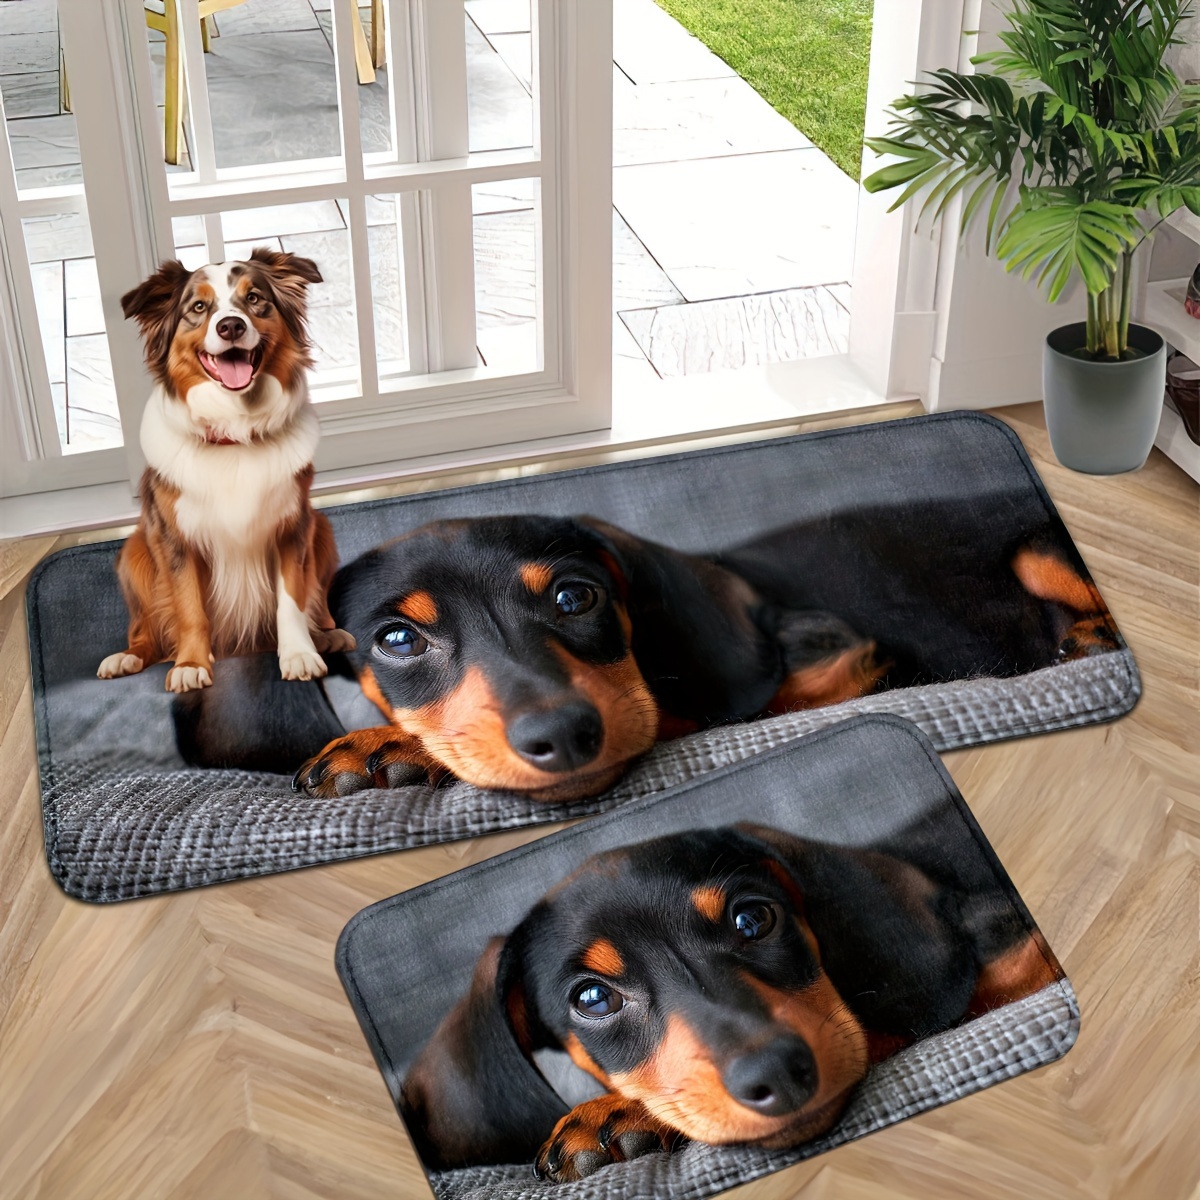 

Cute Dogs Dachshunds Indoor Carpet Rug For Entryway Entrance Floor, Kitchen Bathroom Laundry Room Non Slip Washable Thicken Kitchen Carpet Runner Bathroom Rugs